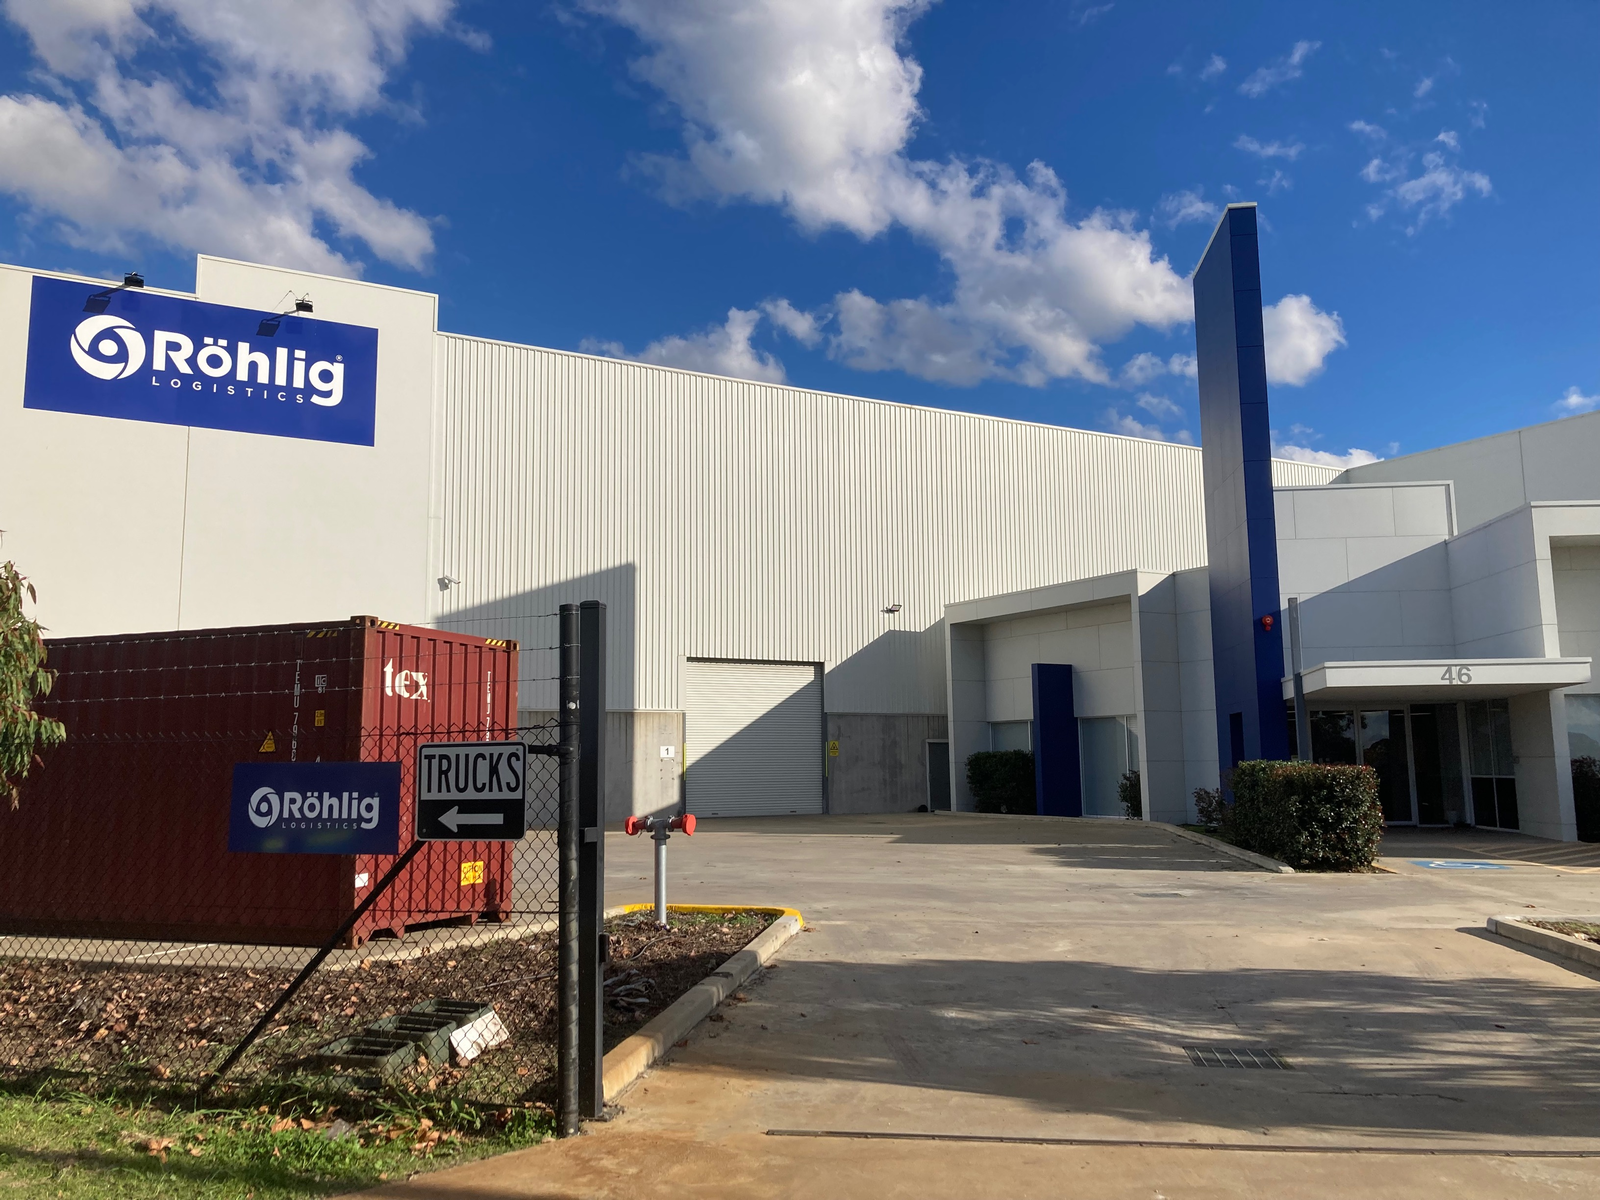 Rohlig Australia expands contract logistics operation with new warehouse opening in Perth Airport, WA.